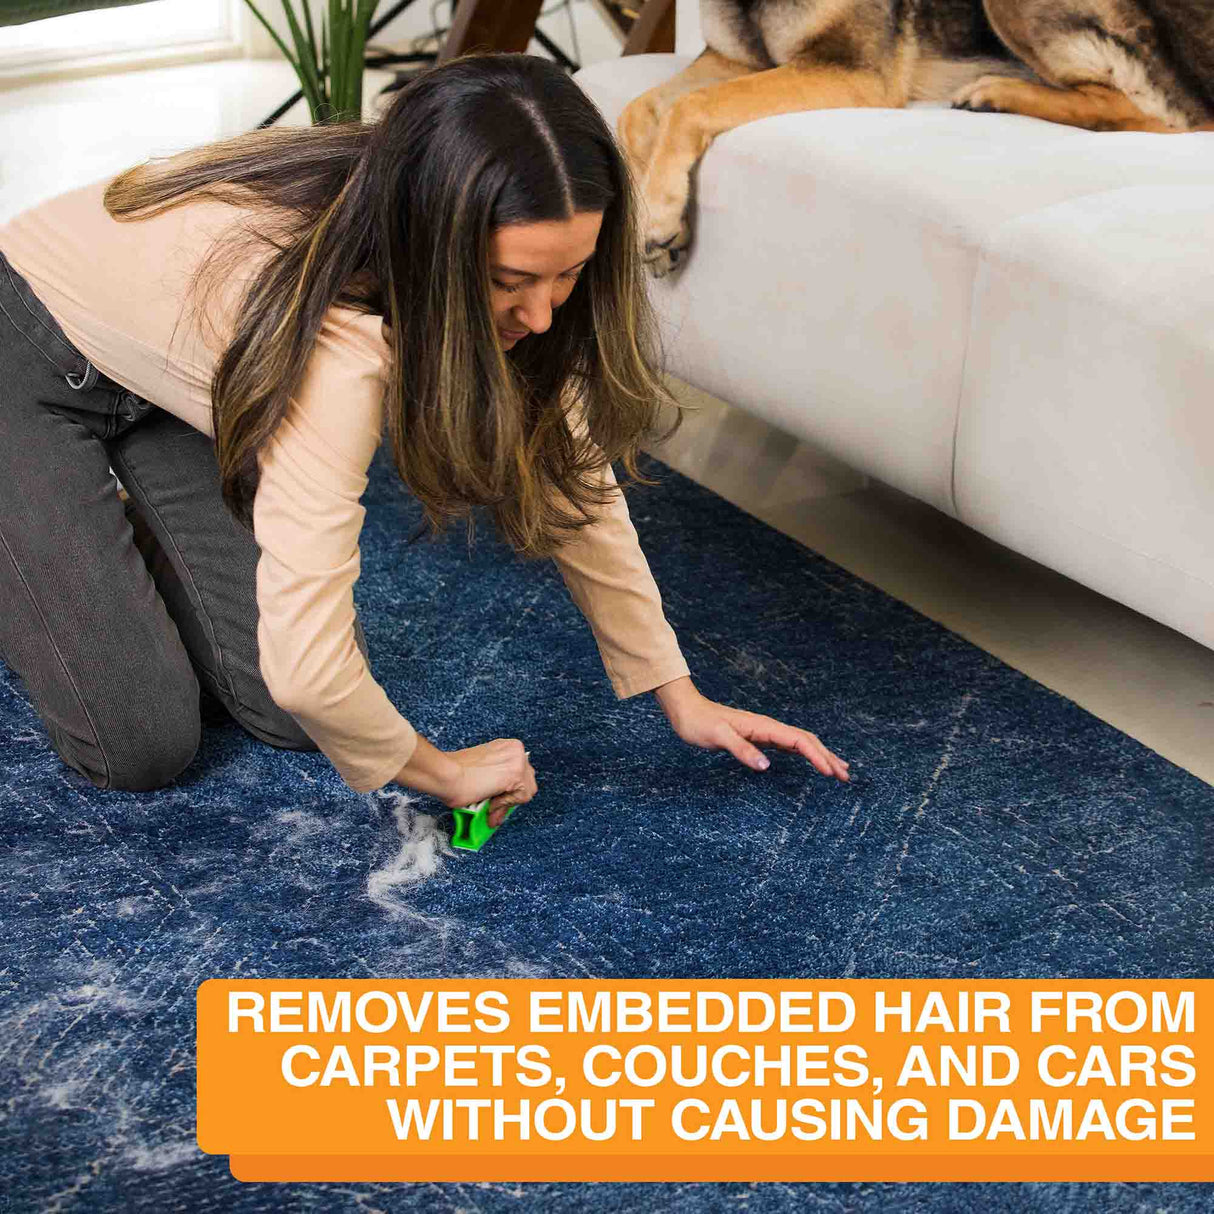 works on carpets, couches, cars, and more without damage